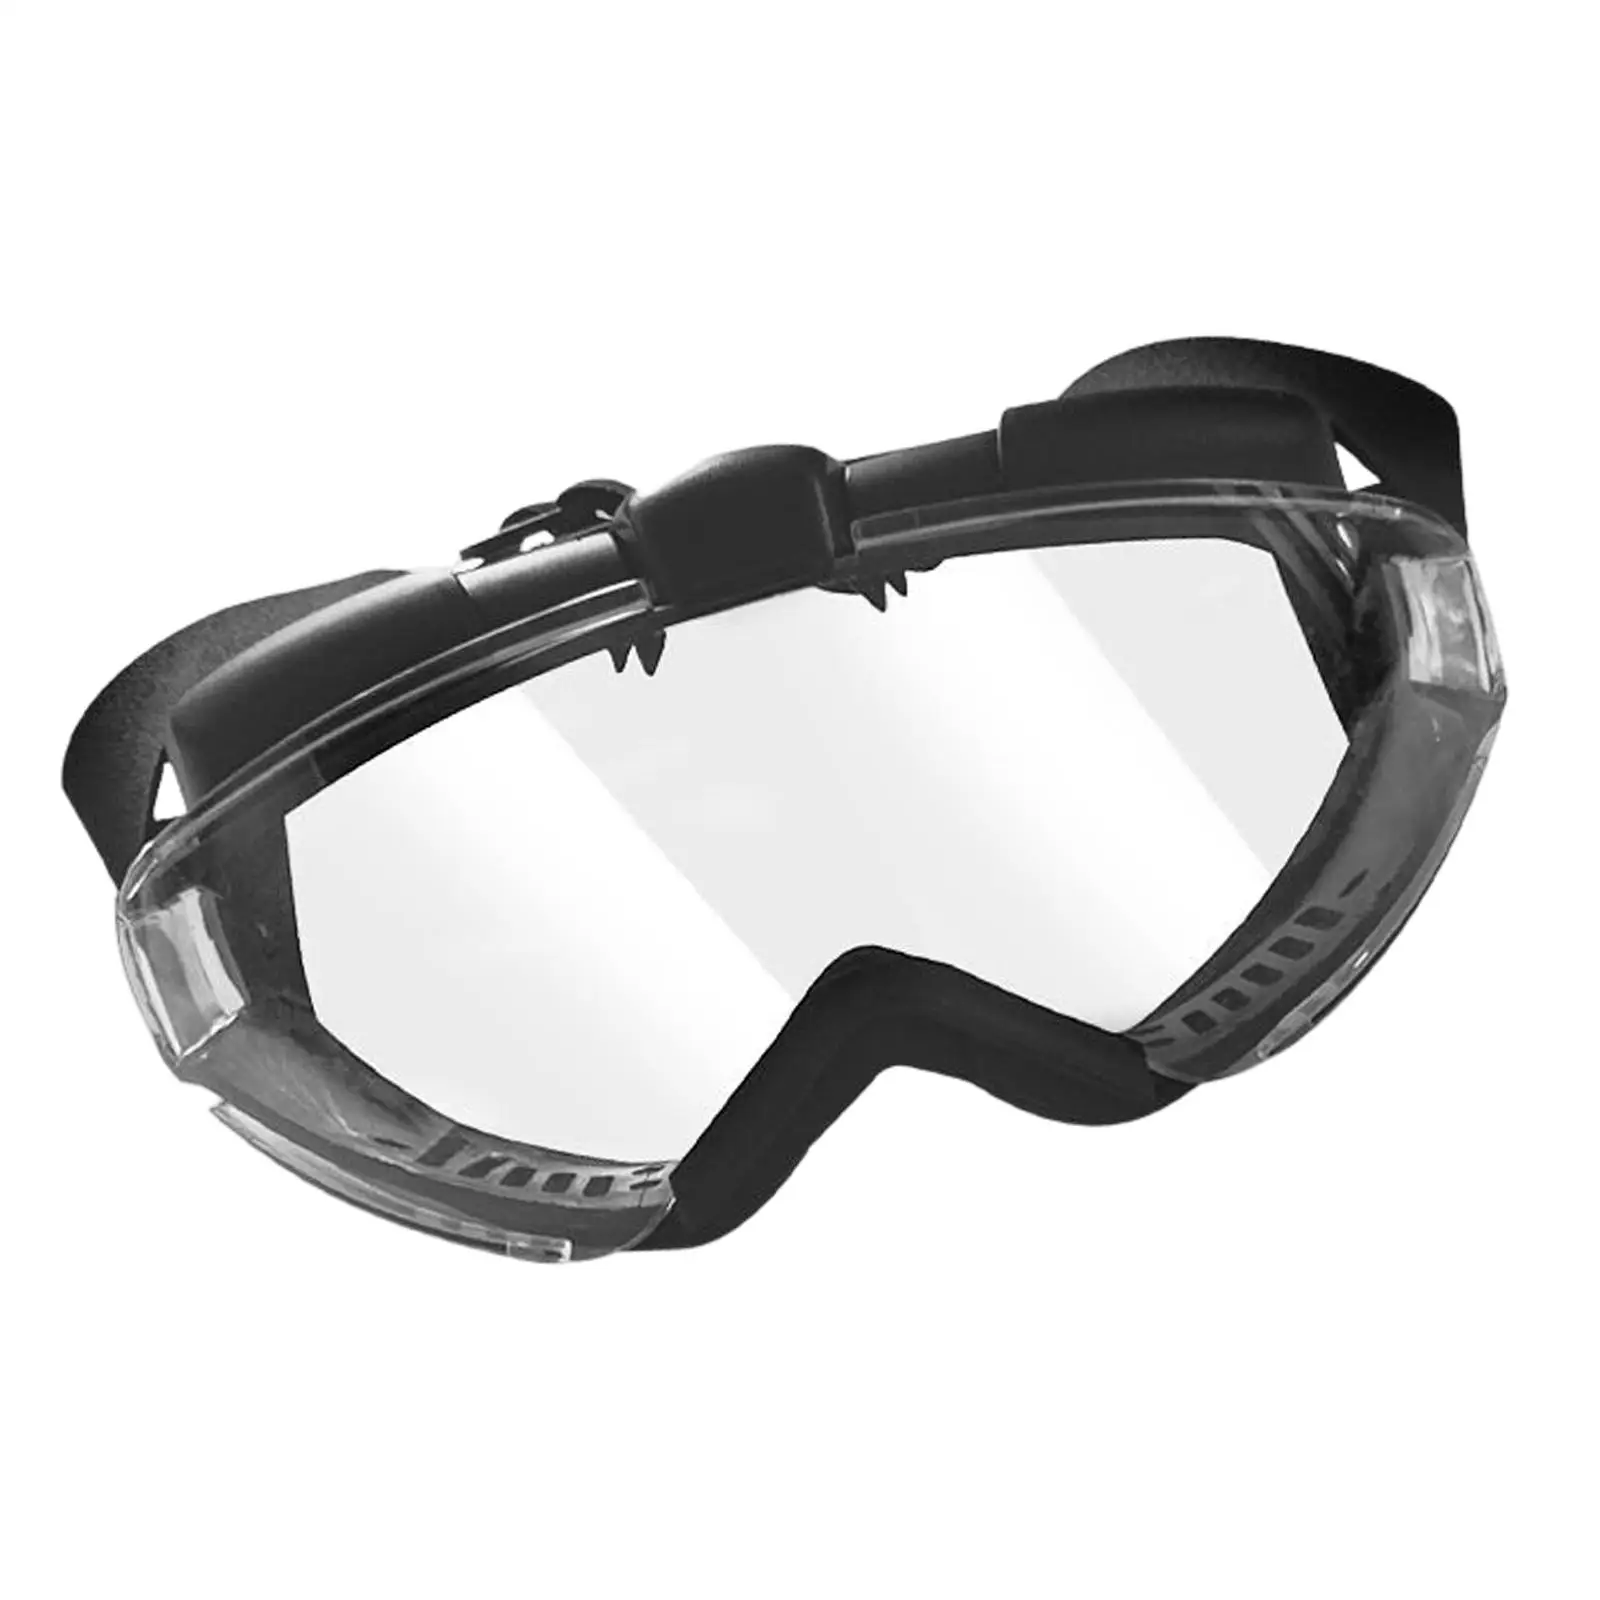 Outdoor Glasses with Adjustable Strap Goggles for Riding Cycling Men Women